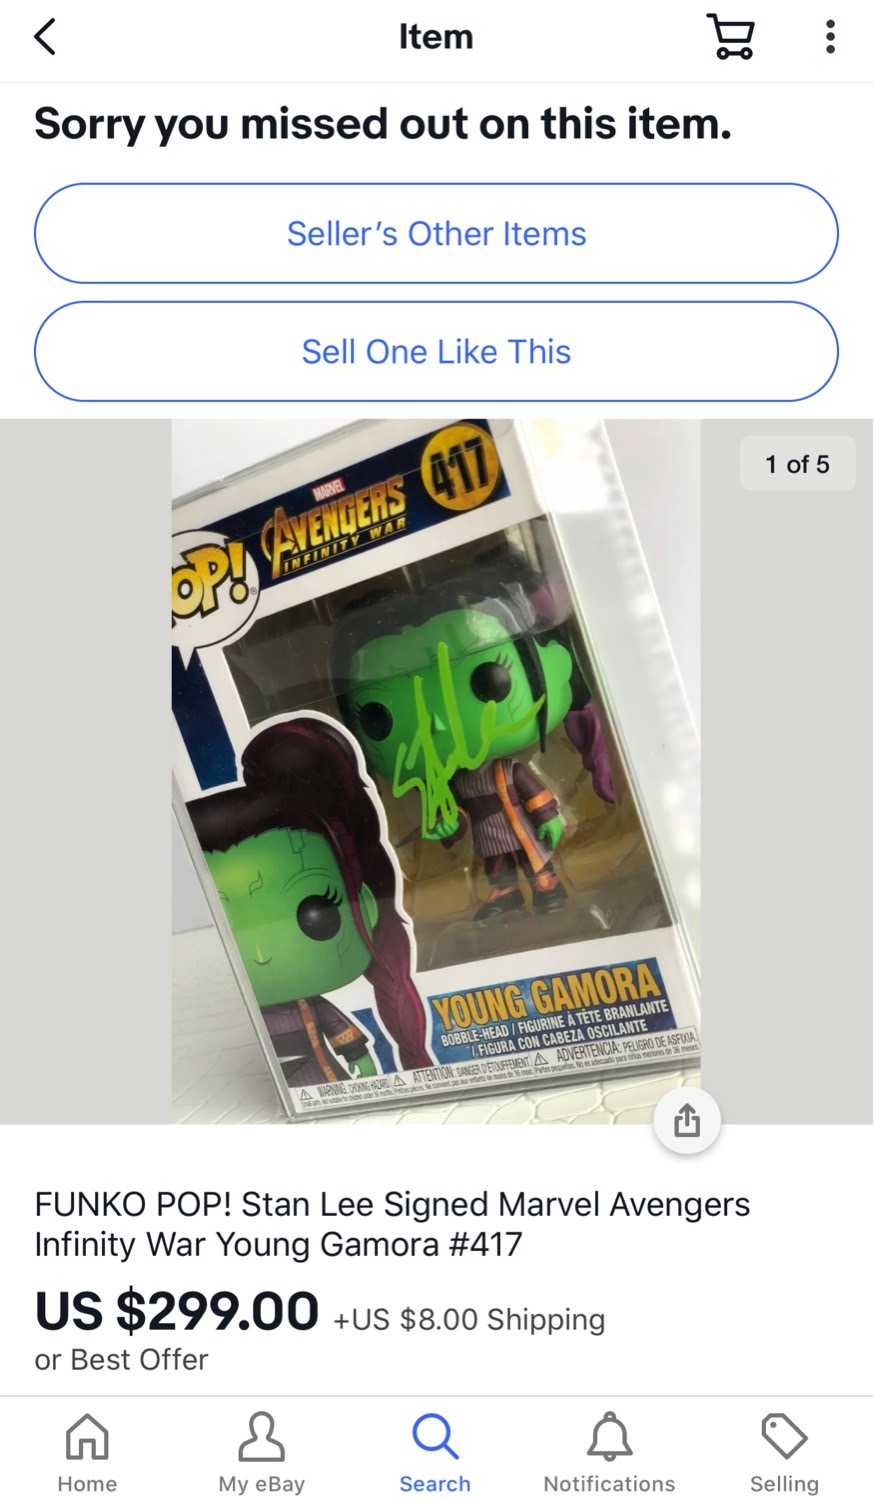 Gamora signed by Stan Lee